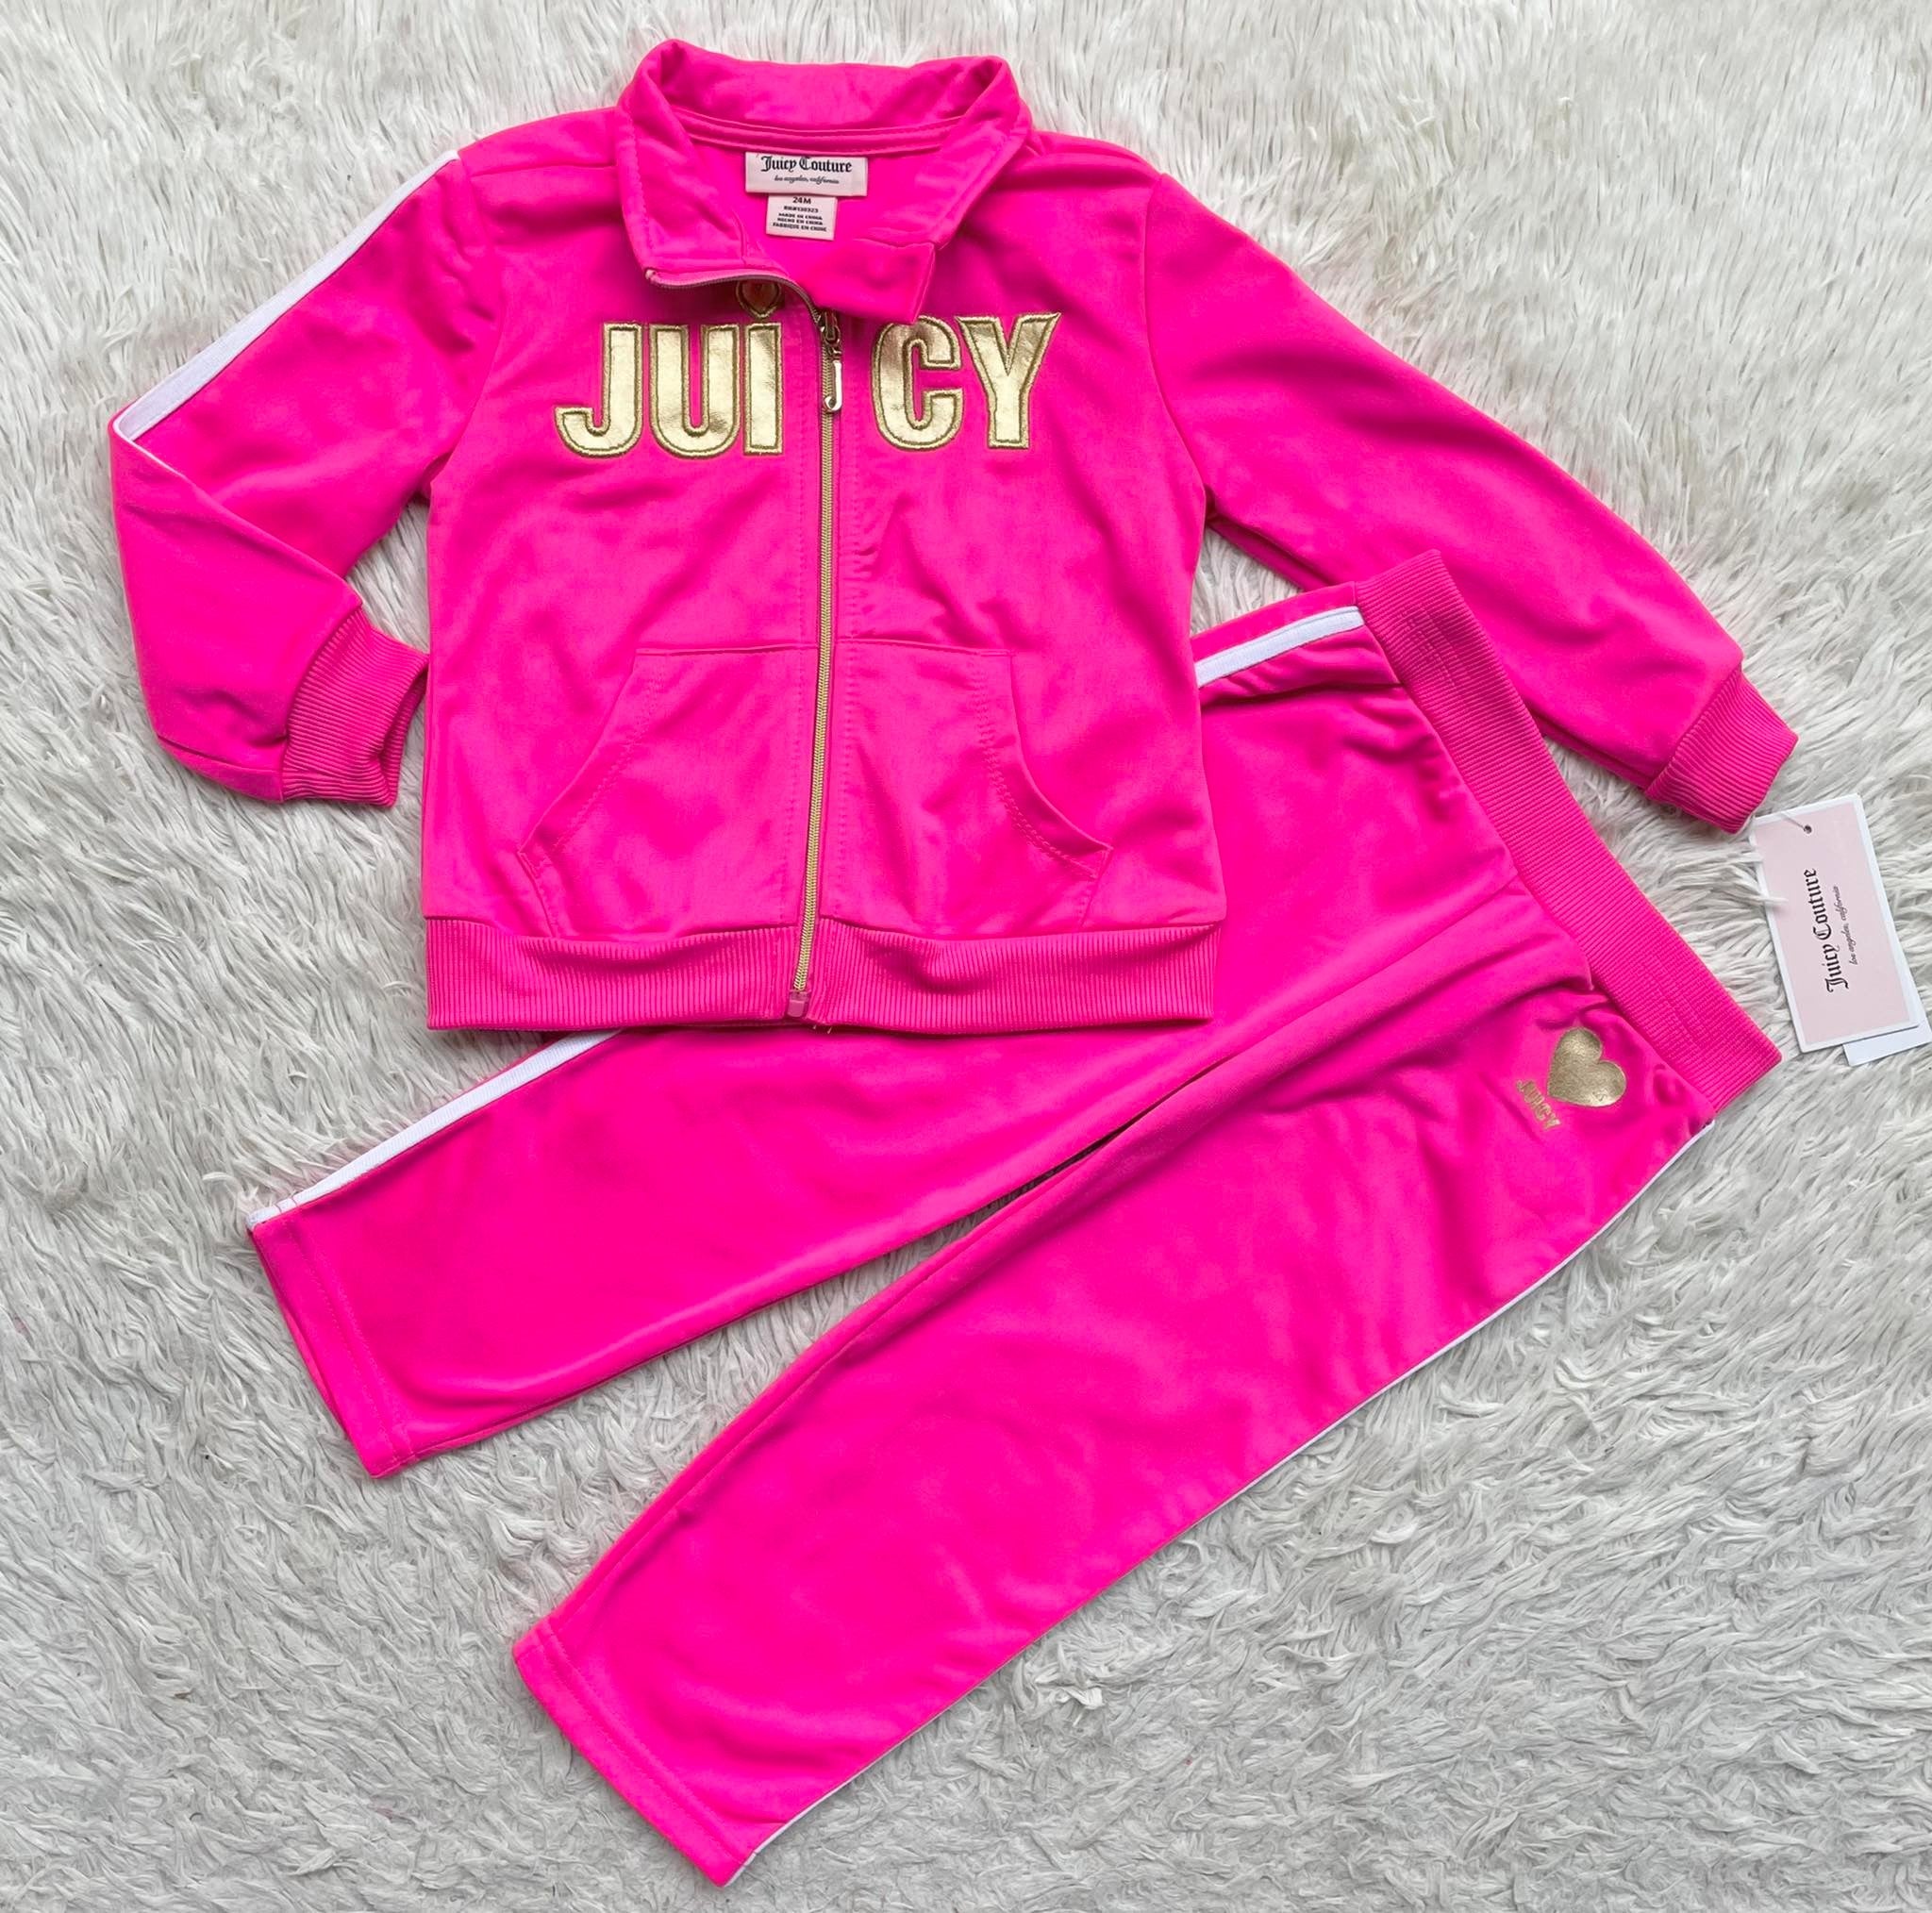 133026 Juicy Couture